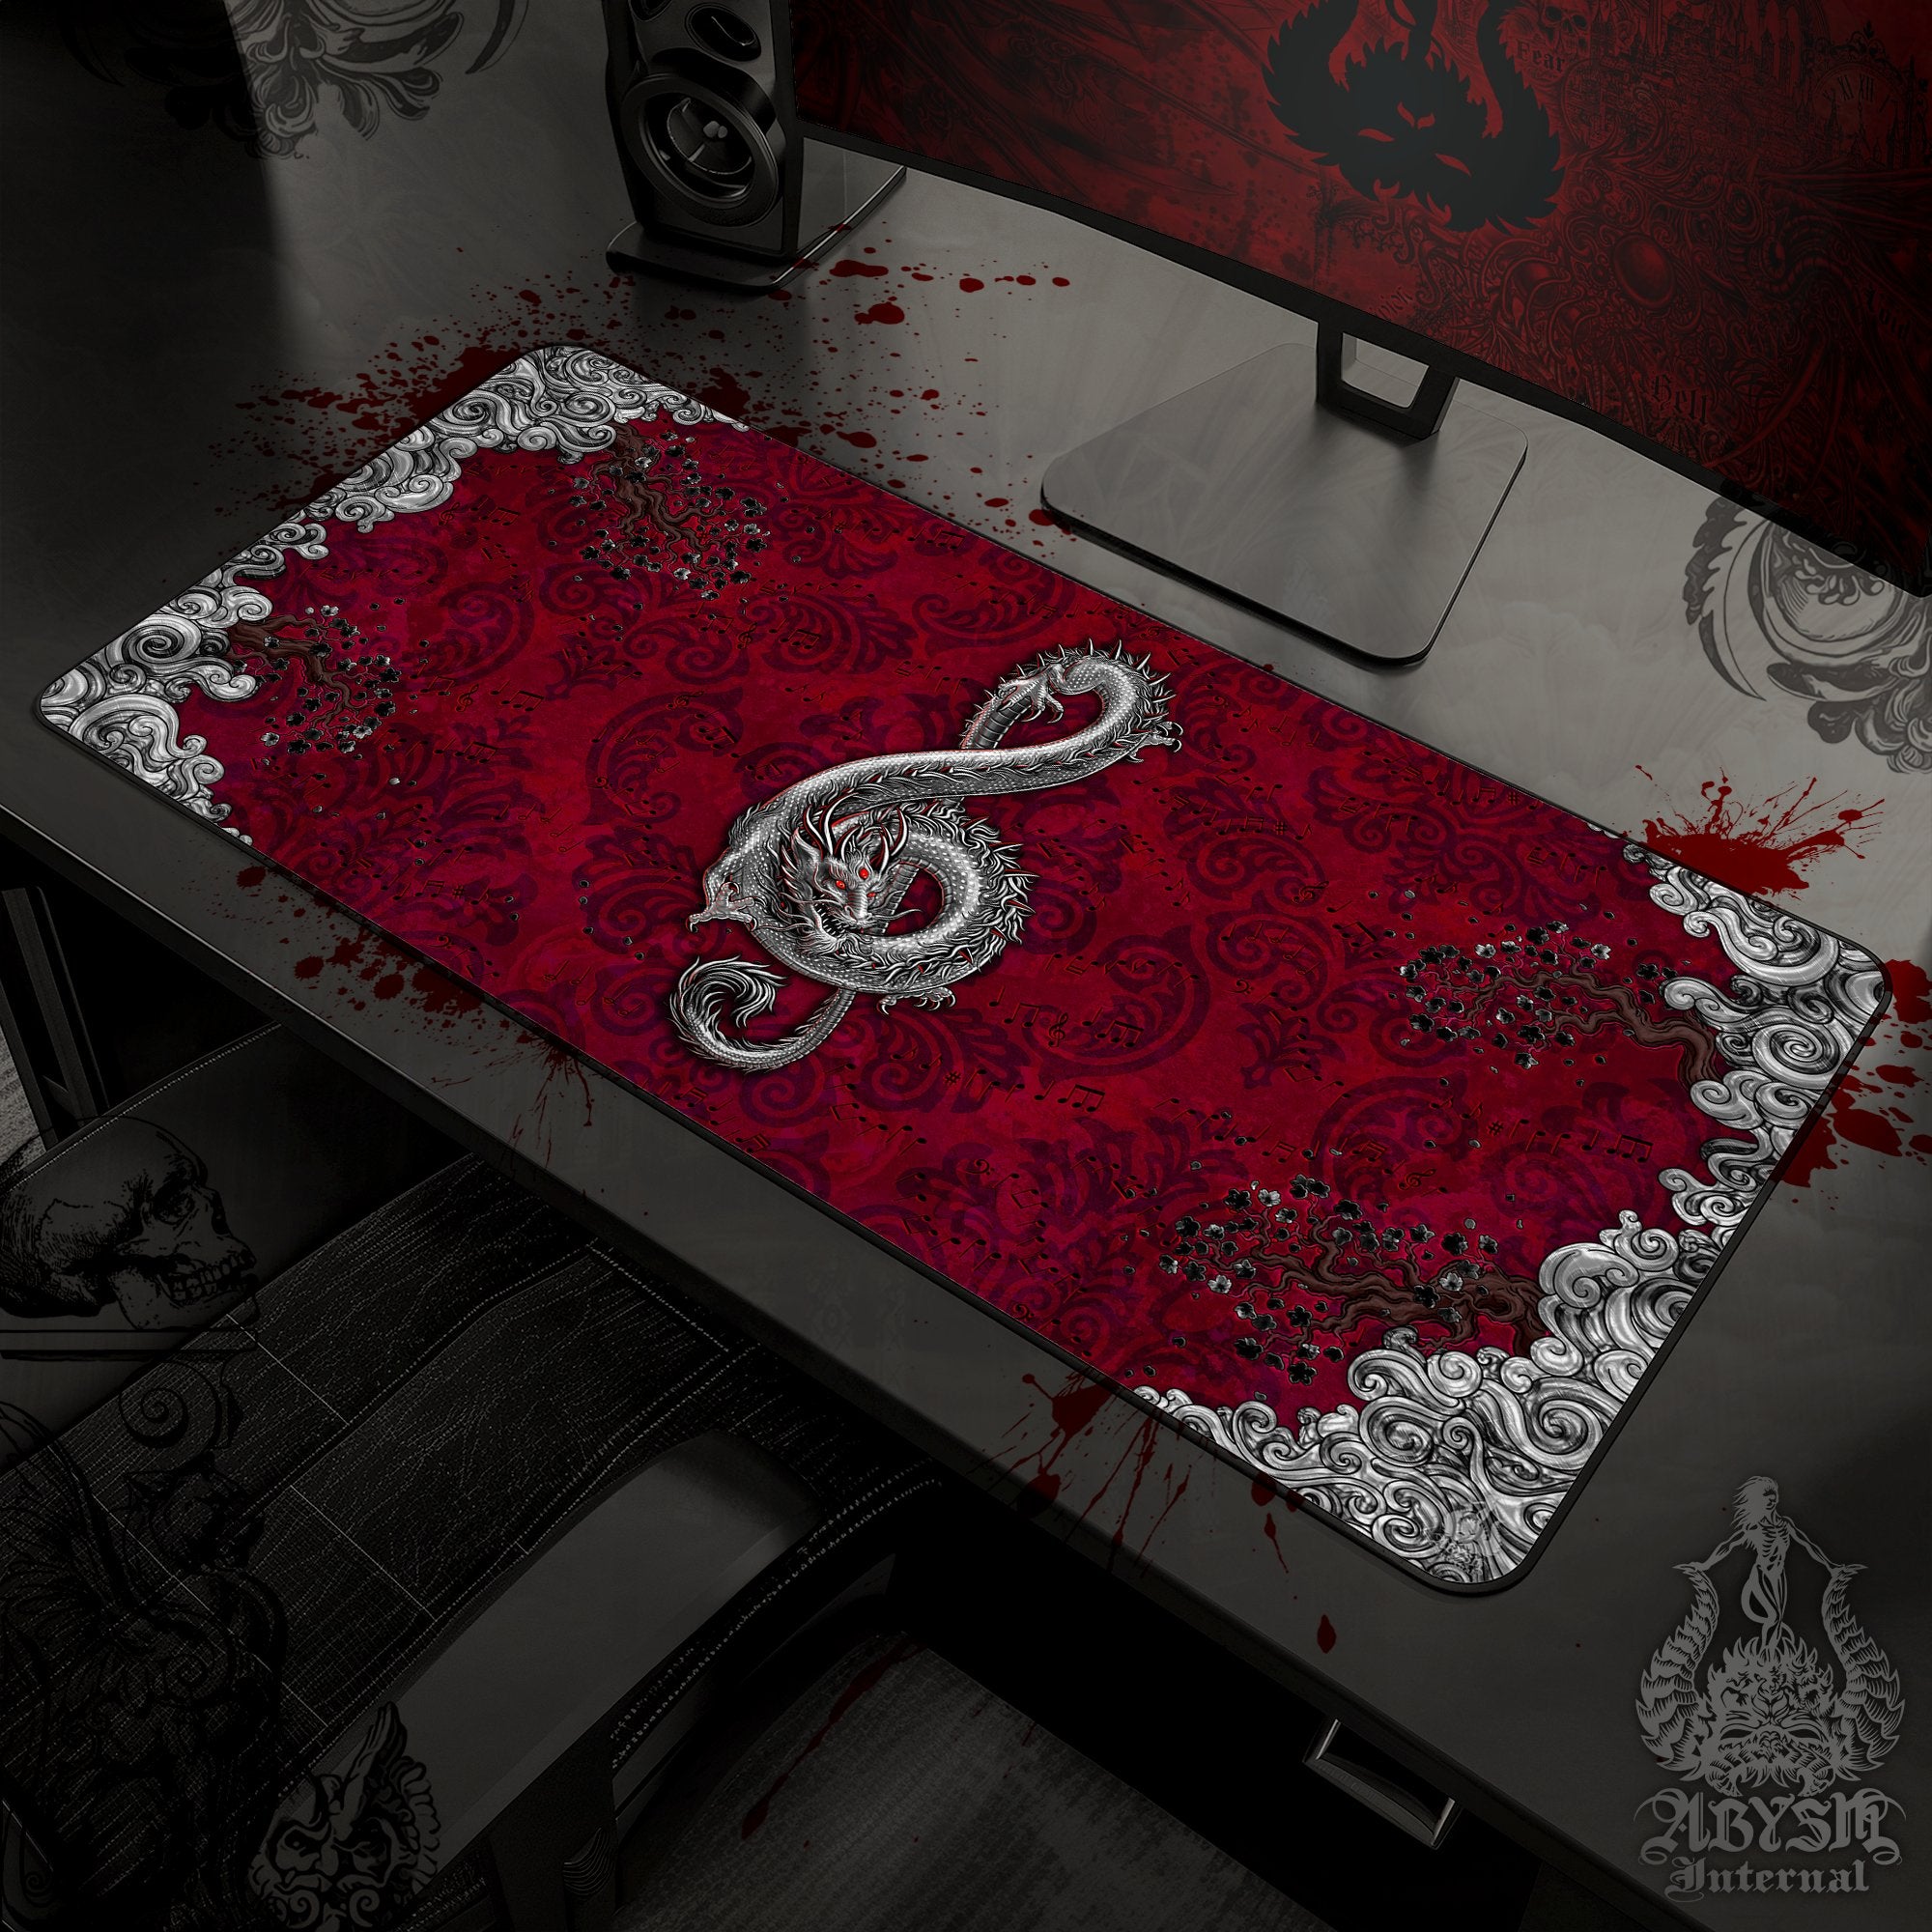 Gothic Dragon Mouse Pad, Music Gaming Desk Mat, Asian Workpad, Goth Fantasy Table Protector Cover, Treble Clef Art Print - Abysm Internal